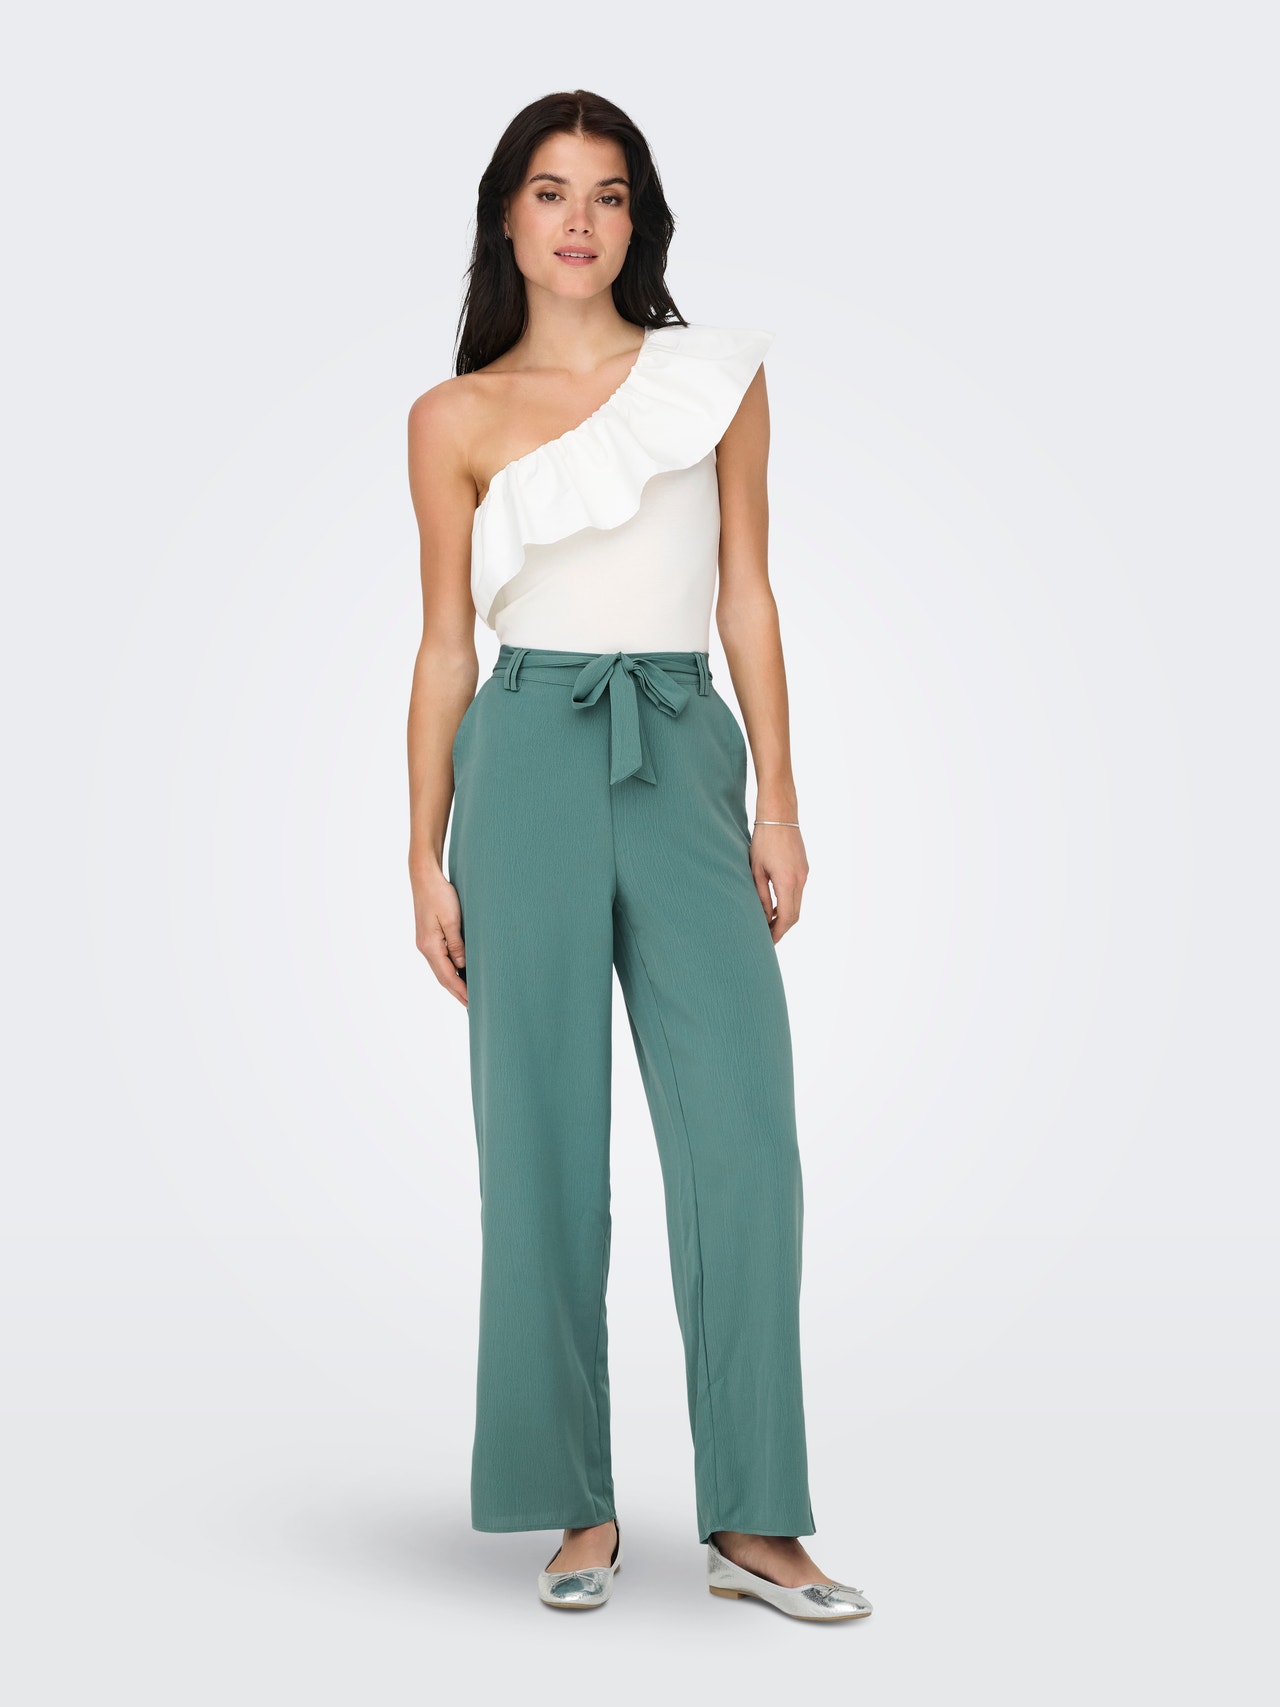 ONLY Trousers with tie belt -Blue Spruce - 15335560